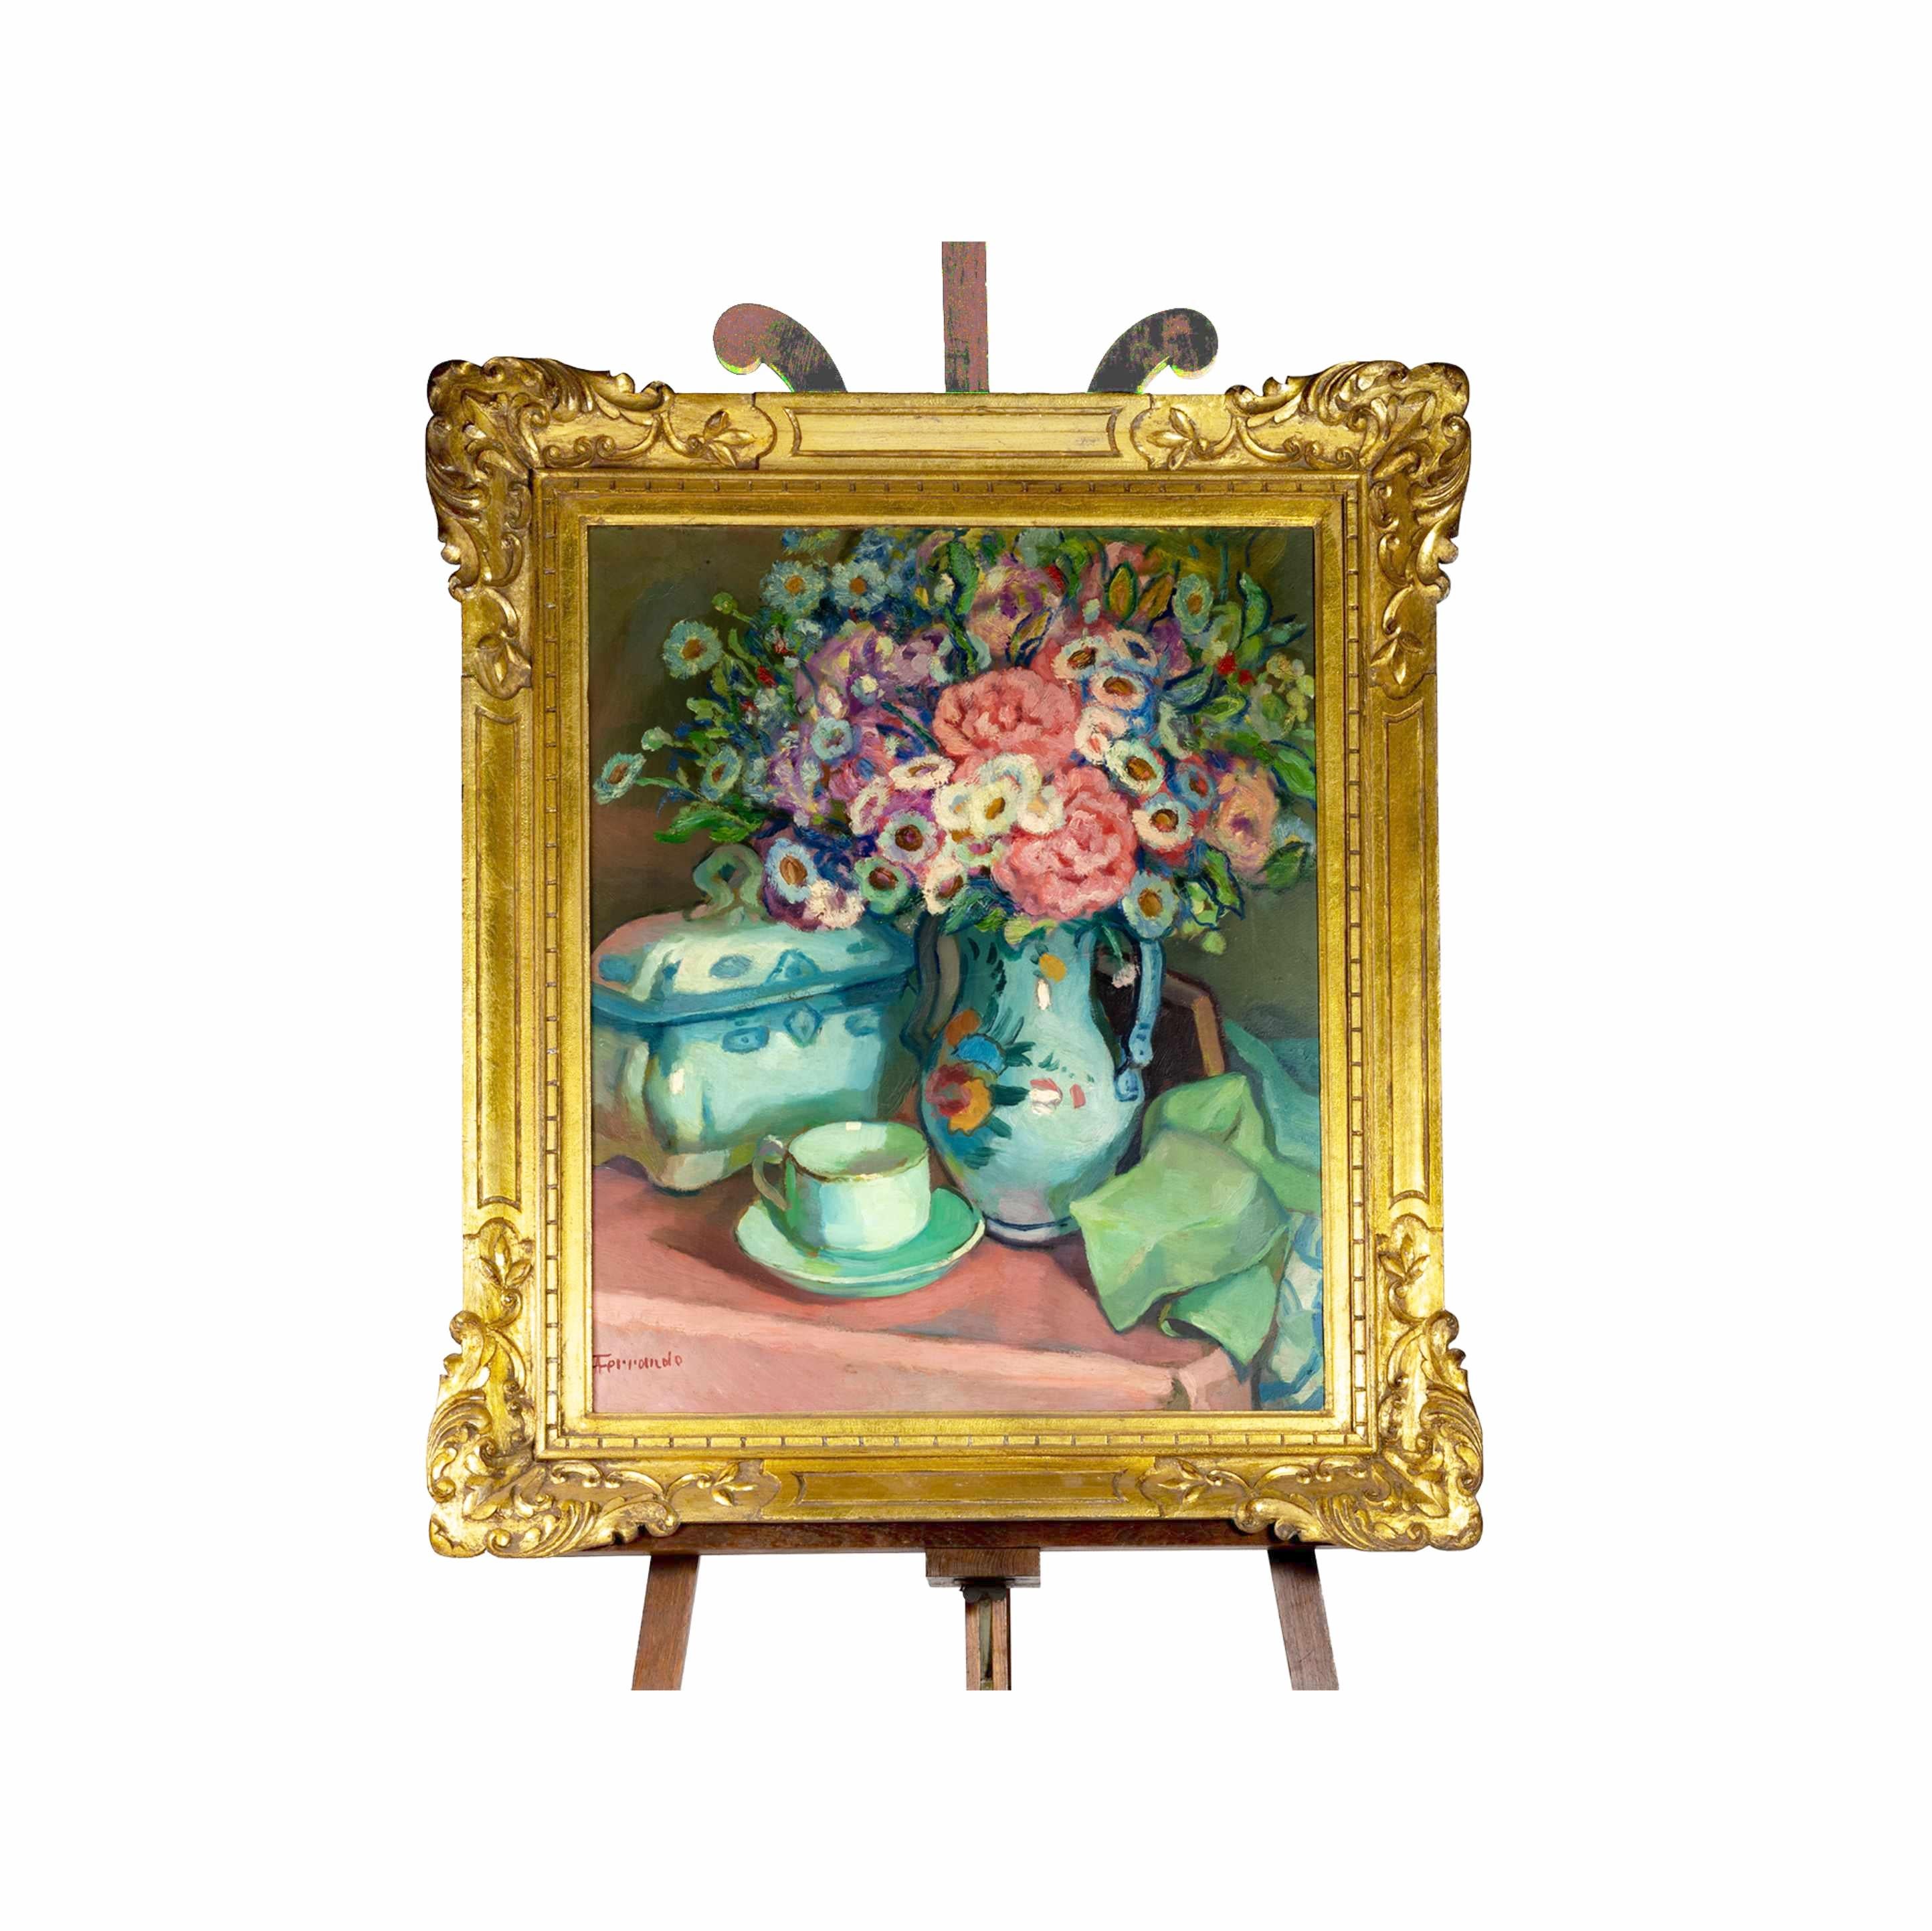 An early 1900s vibrant still nature painting of peony flowers in a blue vase cup on table. 
Oil on composite panel - platex.
Signed ‘A Ferrand’ (lower left).

Augustin Ferrando (1880 - 1957) made Miliana, a city in northern Algeria, his artistic